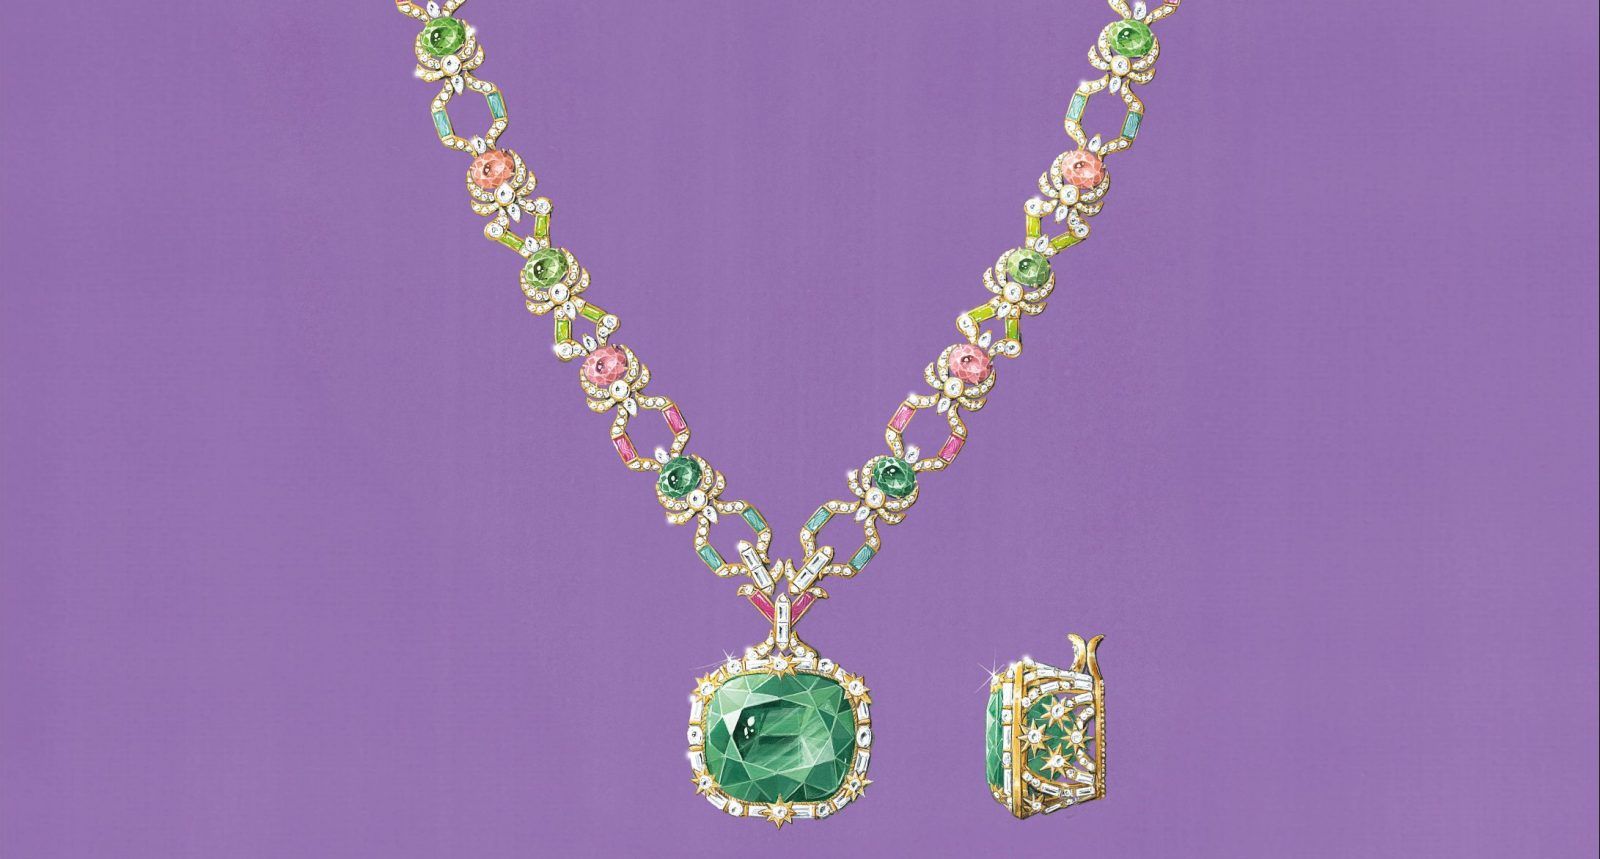 Gucci reveals its second high jewelry collection, even more precious and  colorful